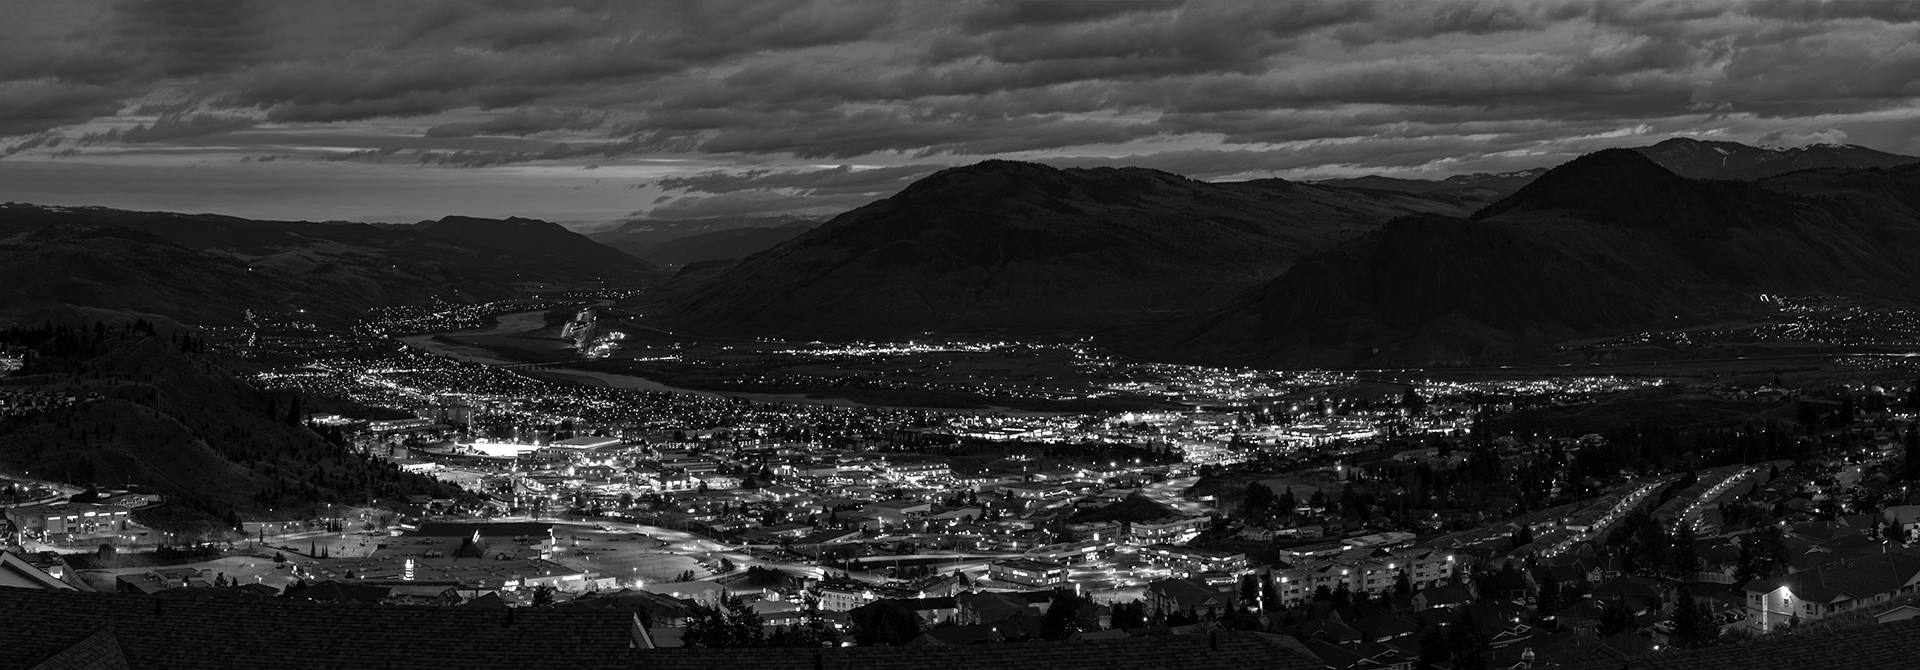 Kamloops panoramic black and white view of mountain and city with lights